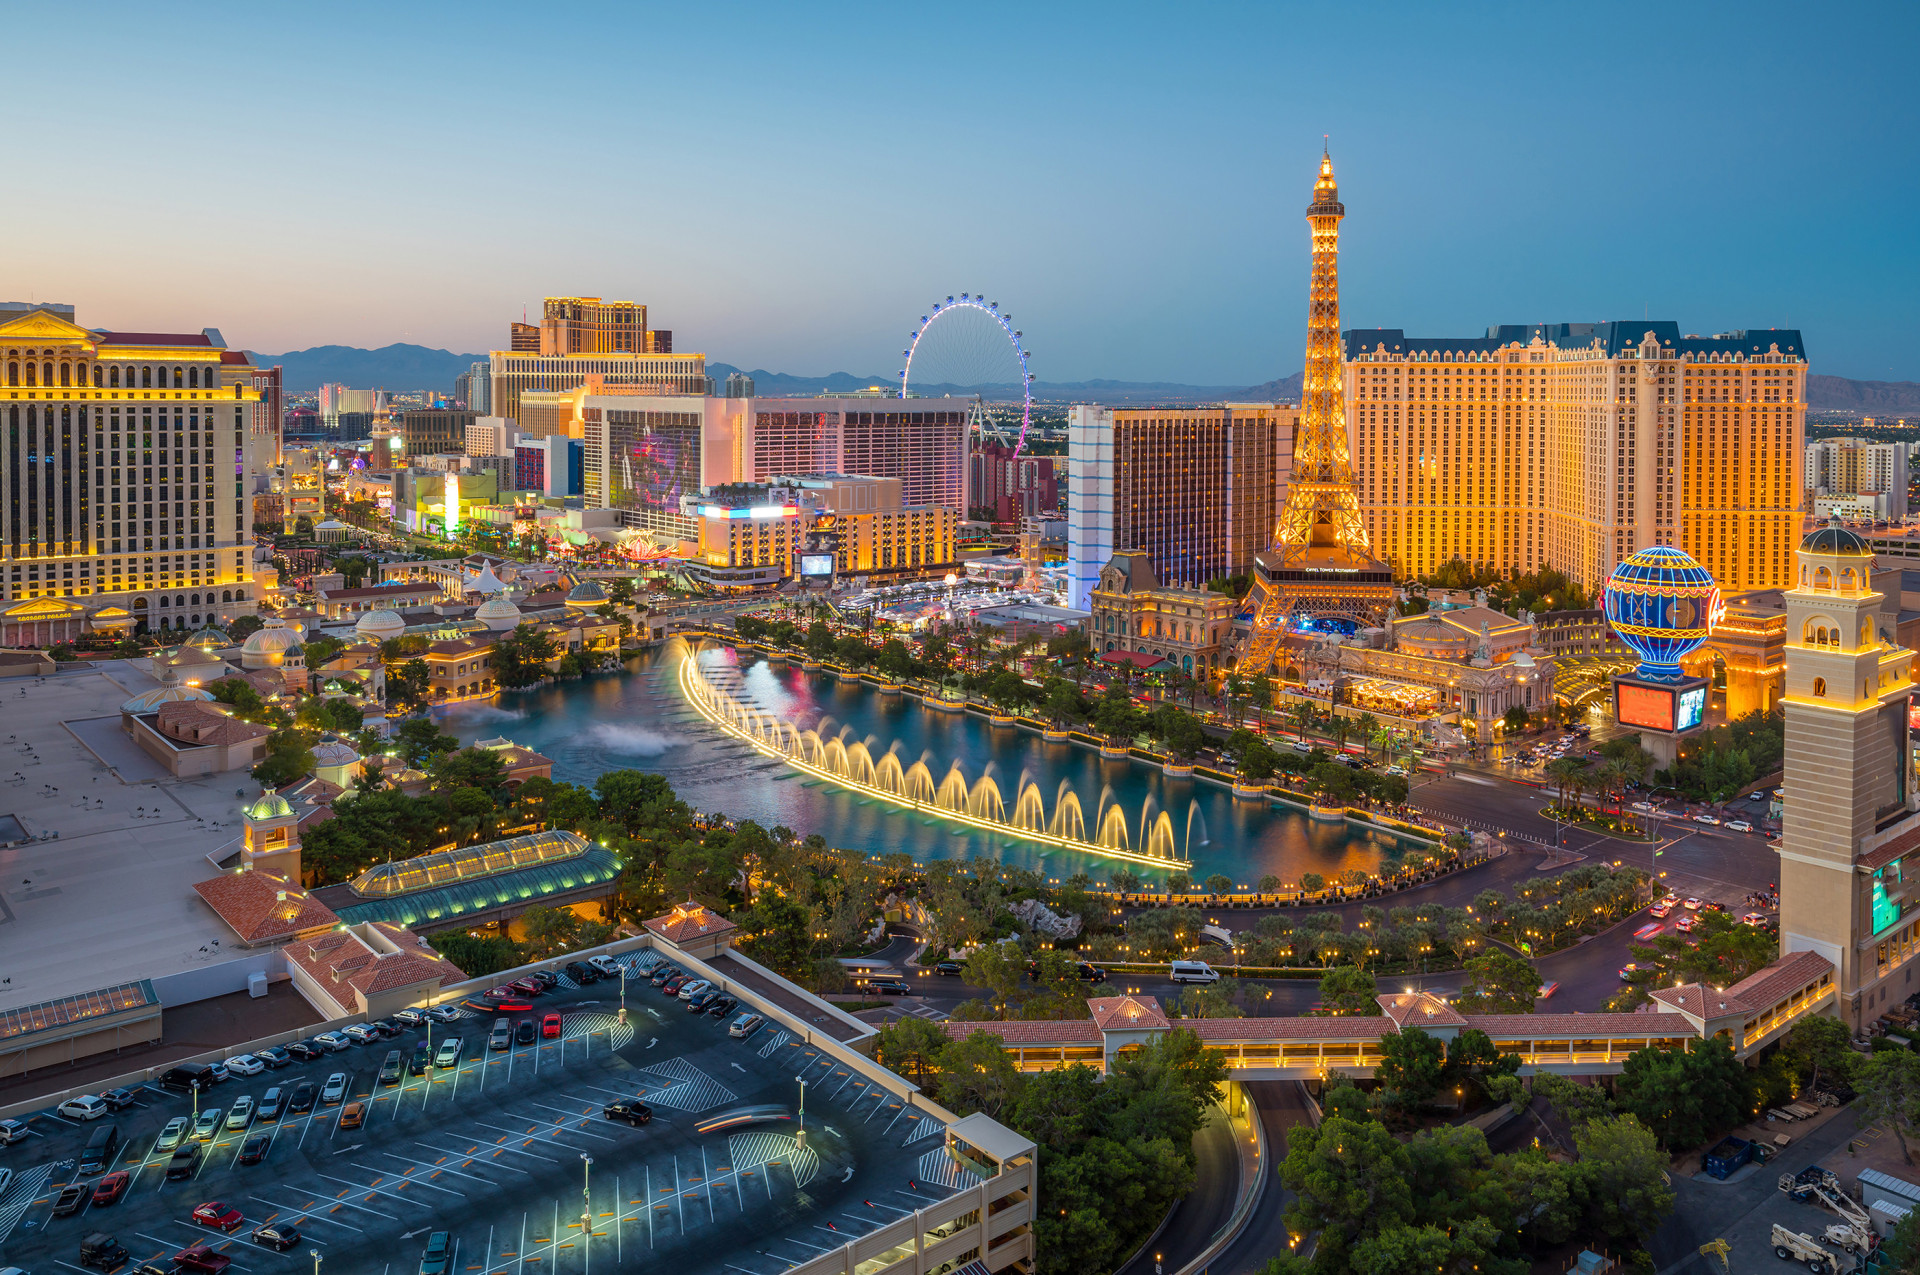 Las Vegas draws crowds to its casinos and nightclubs, and wheelchair users certainly aren't left behind.<p><a href="https://www.msn.com/en-us/community/channel/vid-7xx8mnucu55yw63we9va2gwr7uihbxwc68fxqp25x6tg4ftibpra?cvid=94631541bc0f4f89bfd59158d696ad7e">Follow us and access great exclusive content every day</a></p>